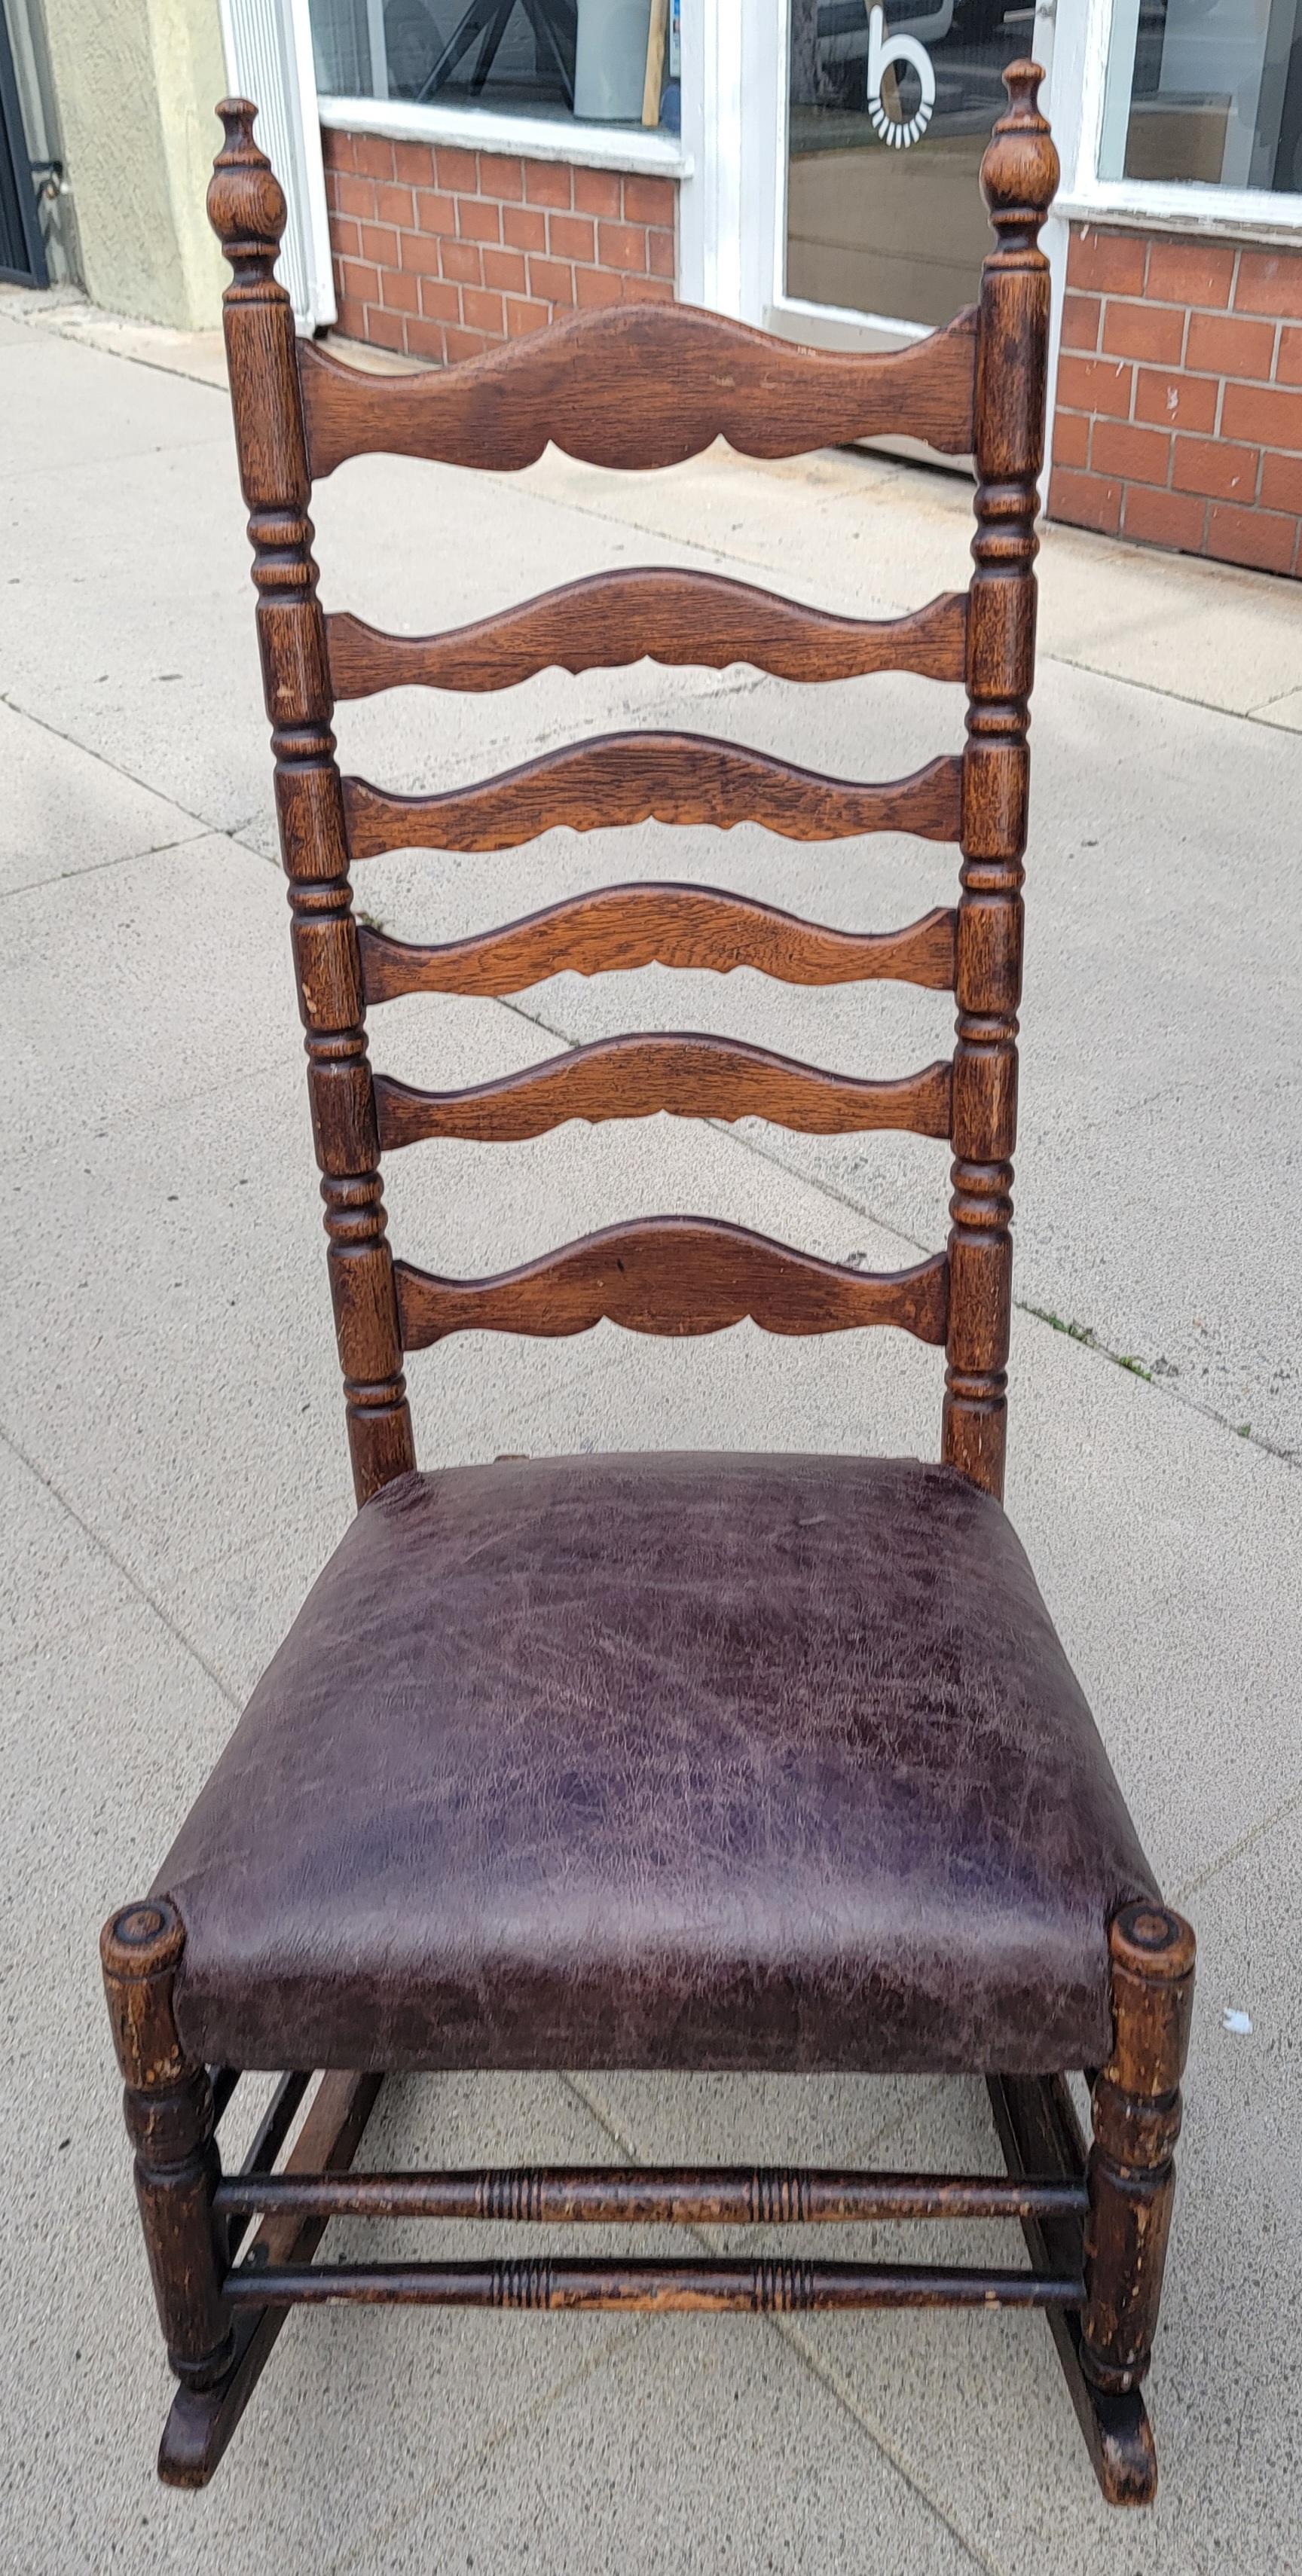 vintage rocking chair with leather seat